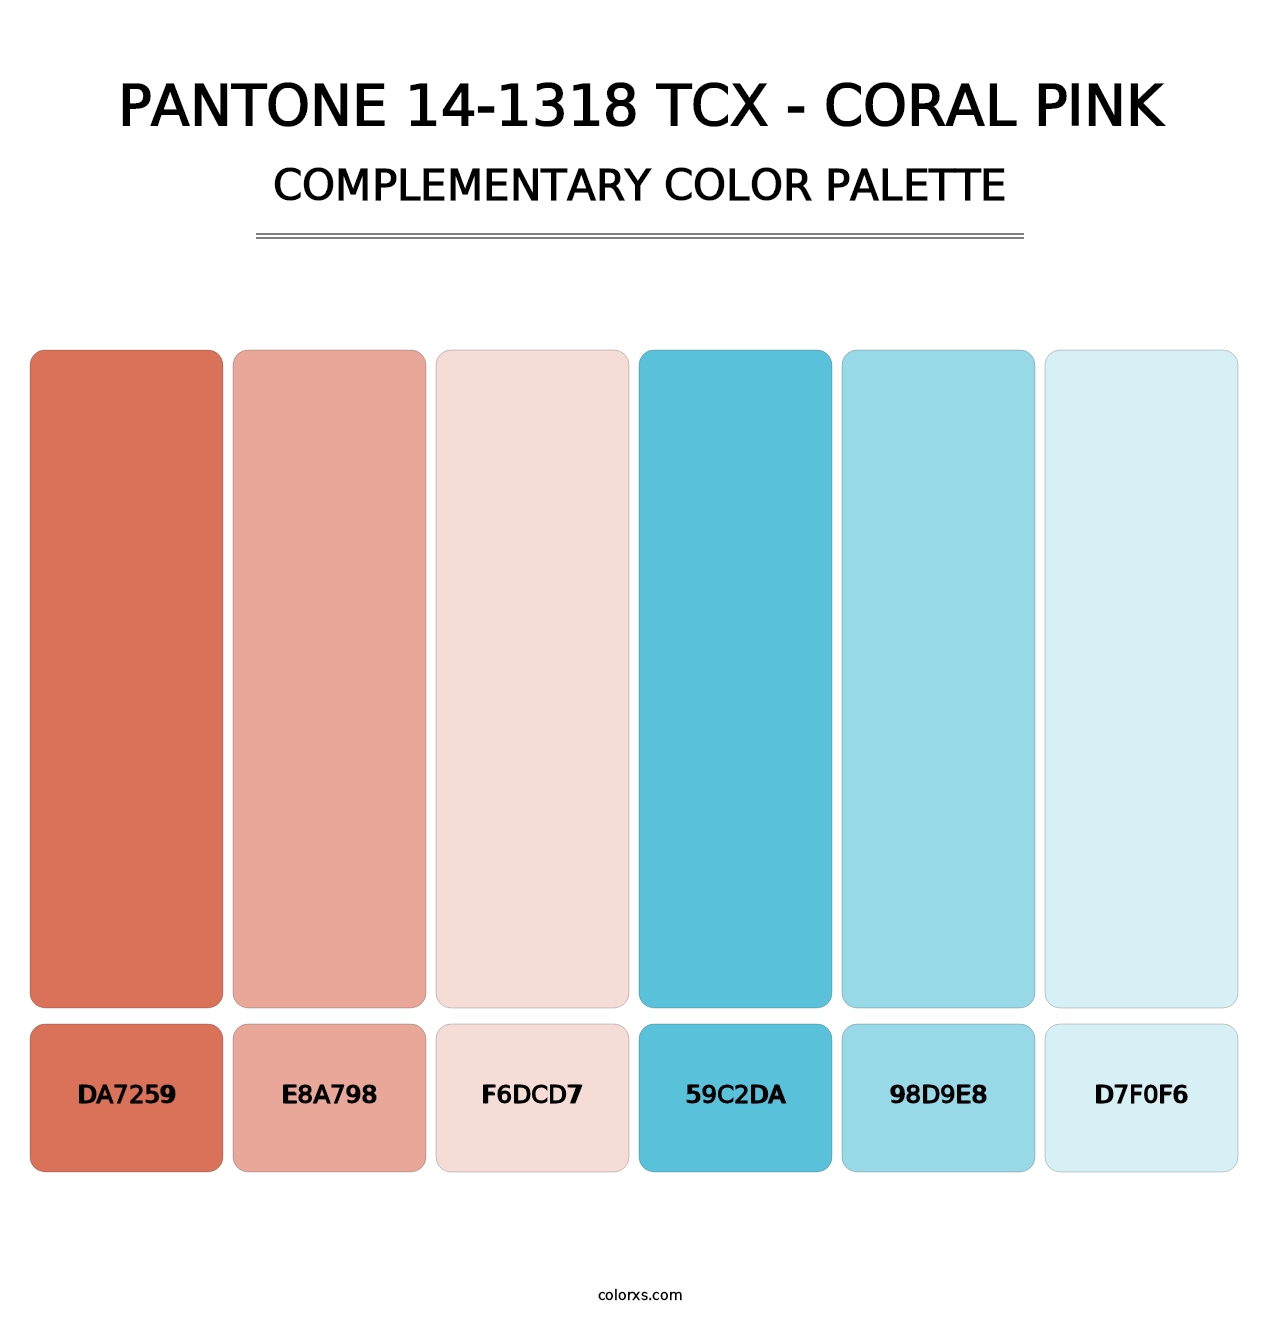 PANTONE 14-1318 TCX - Coral Pink - Complementary Color Palette